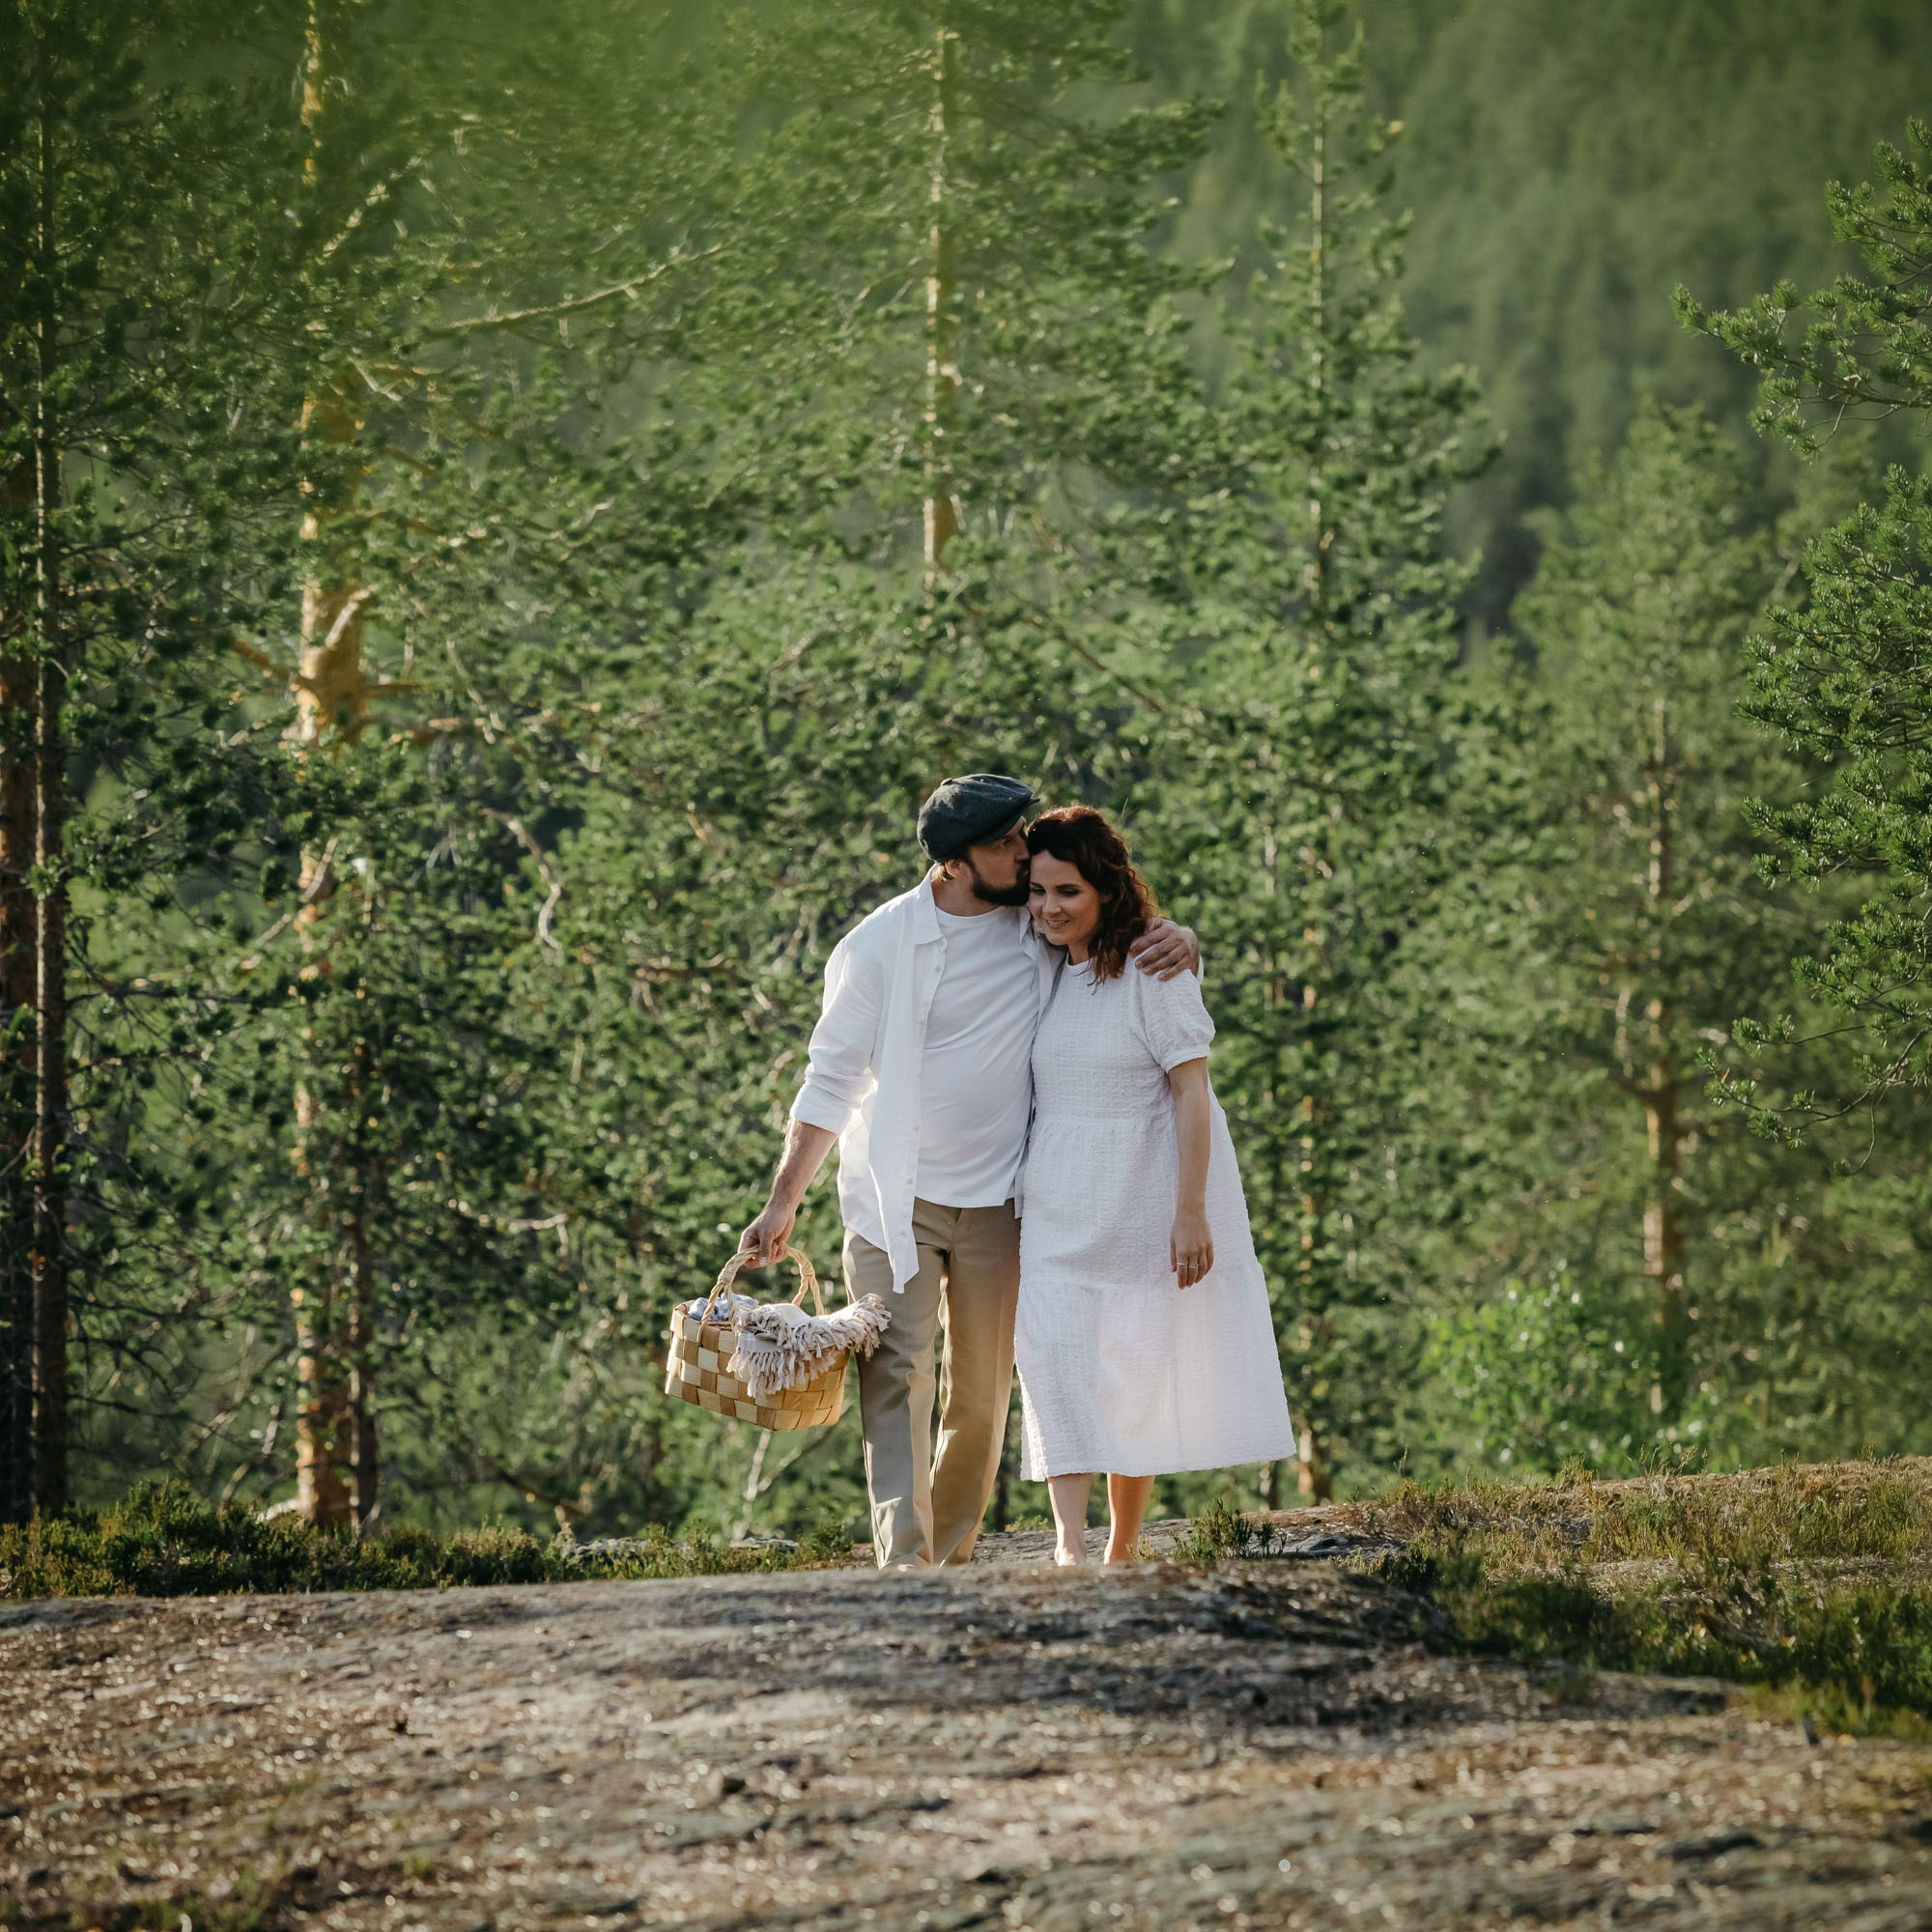 Romantic Midnight Sun picnic at the summer forest at Arctic TreeHouse Hotel